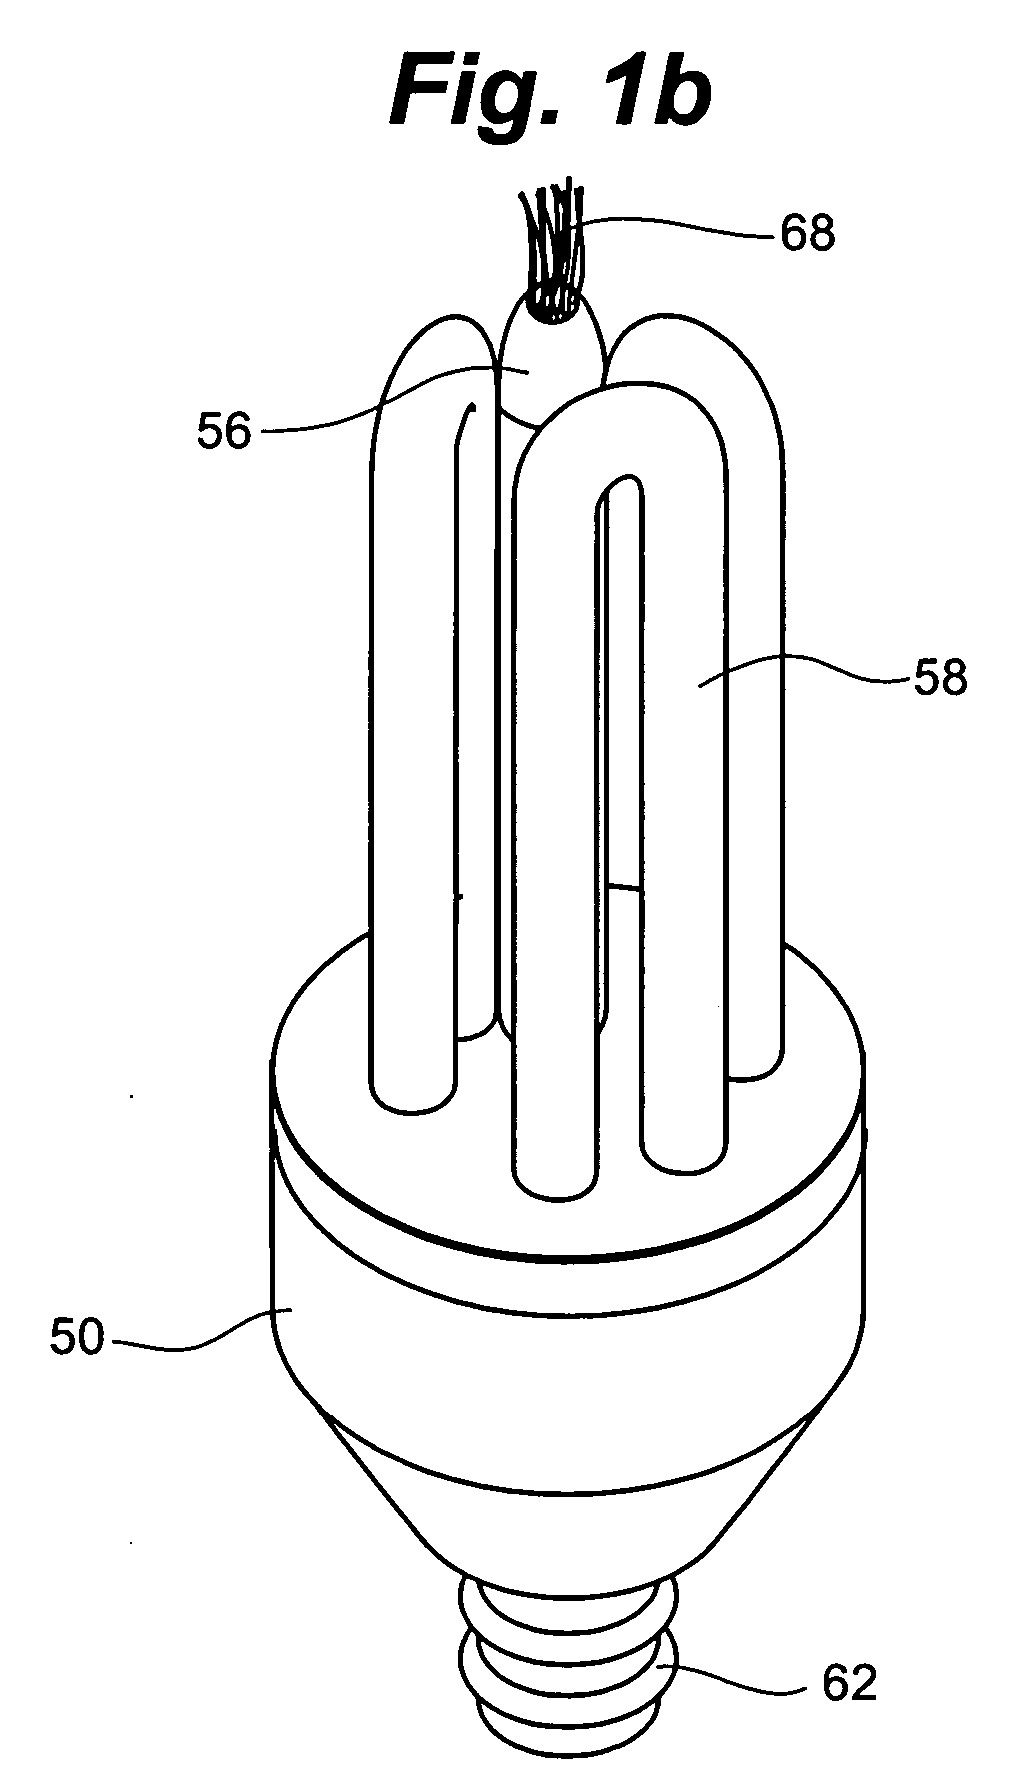 Anion generator for incorporation into lighting apparatuses and other appliances